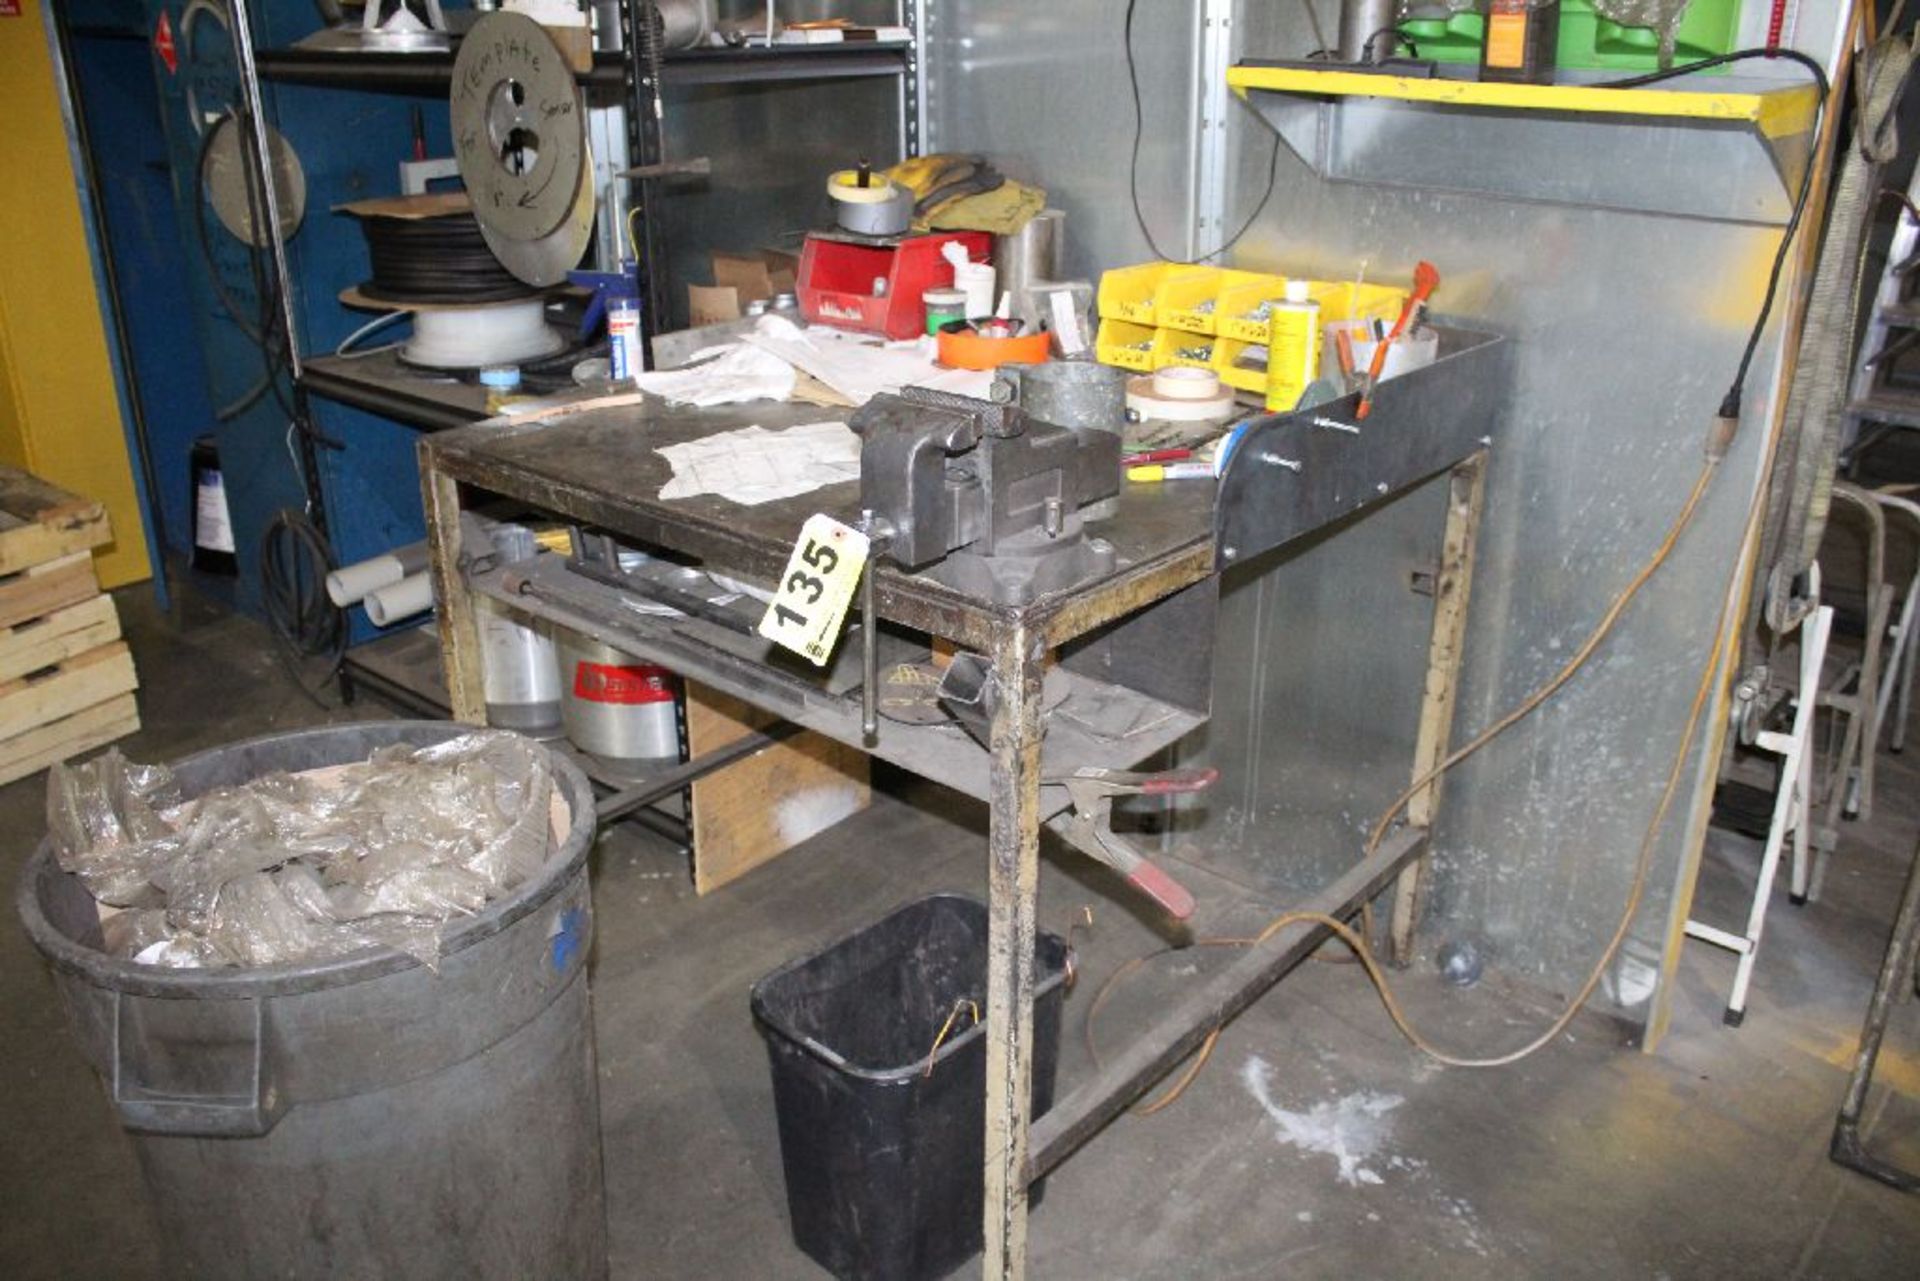 HEAVY DUTY STEEL TABLE-42" X 42" X 36" WITH 5" VISE WITH ROTARY BASE